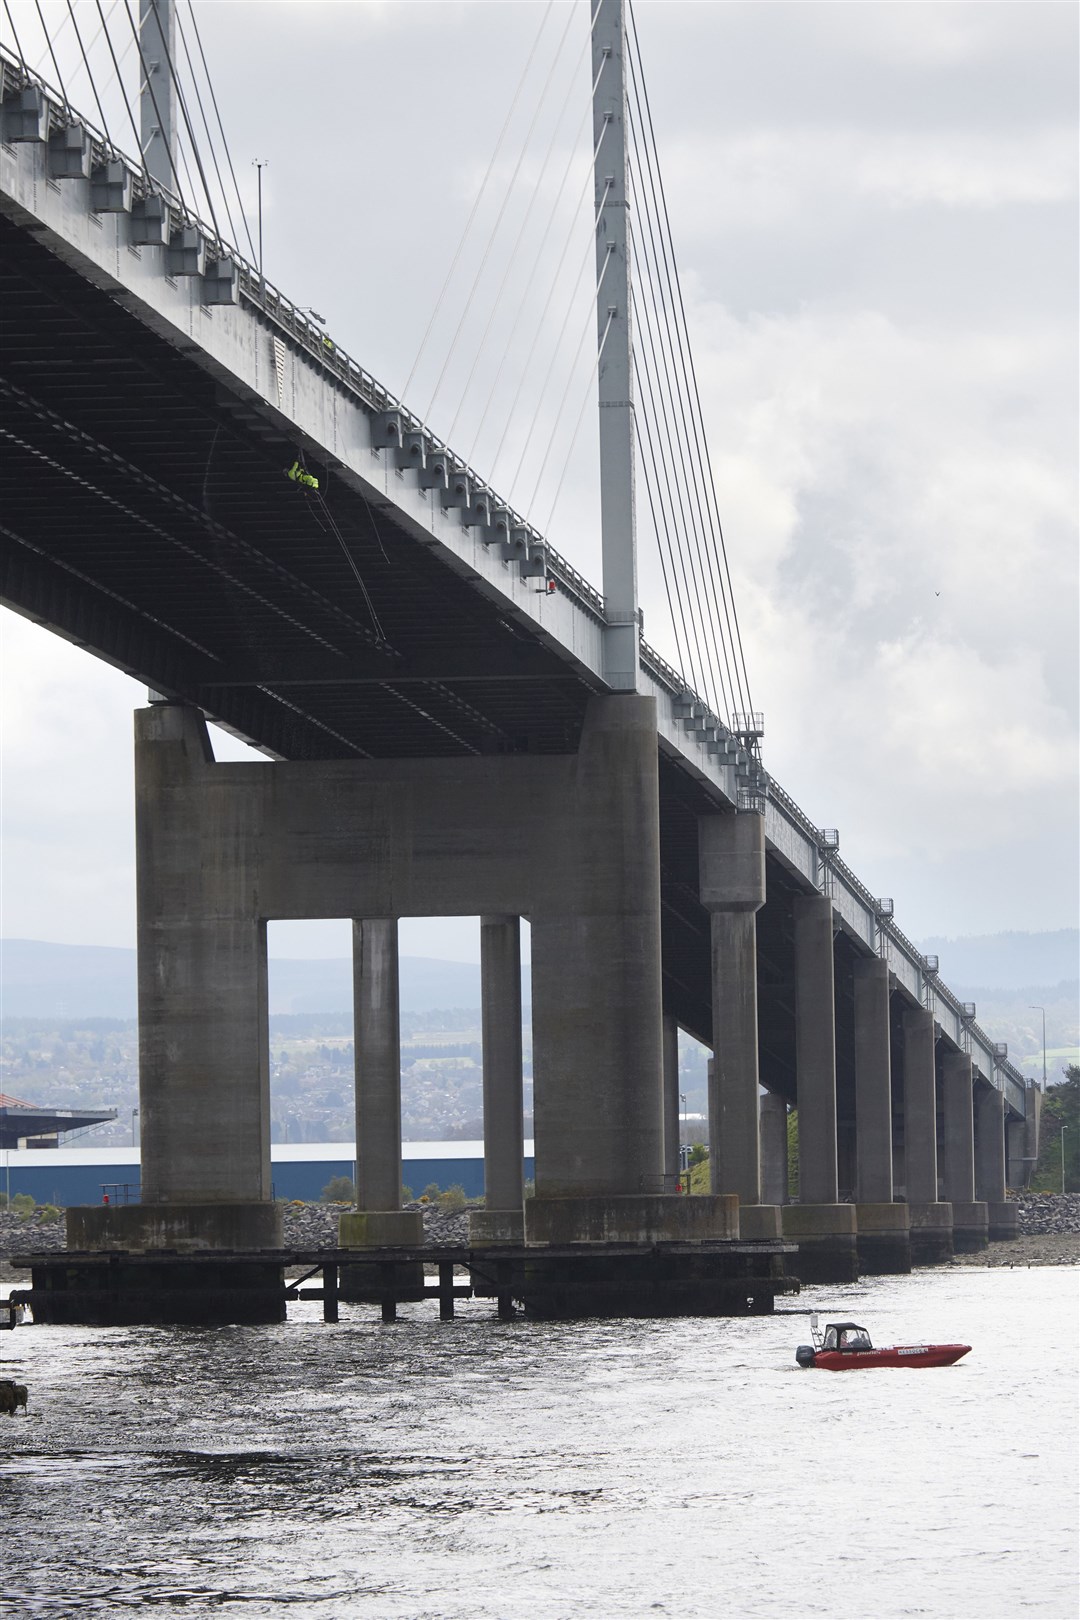 Contractors carried out the specialist repairs to the pipe which runs beneath the Kessock Bridge's road deck.